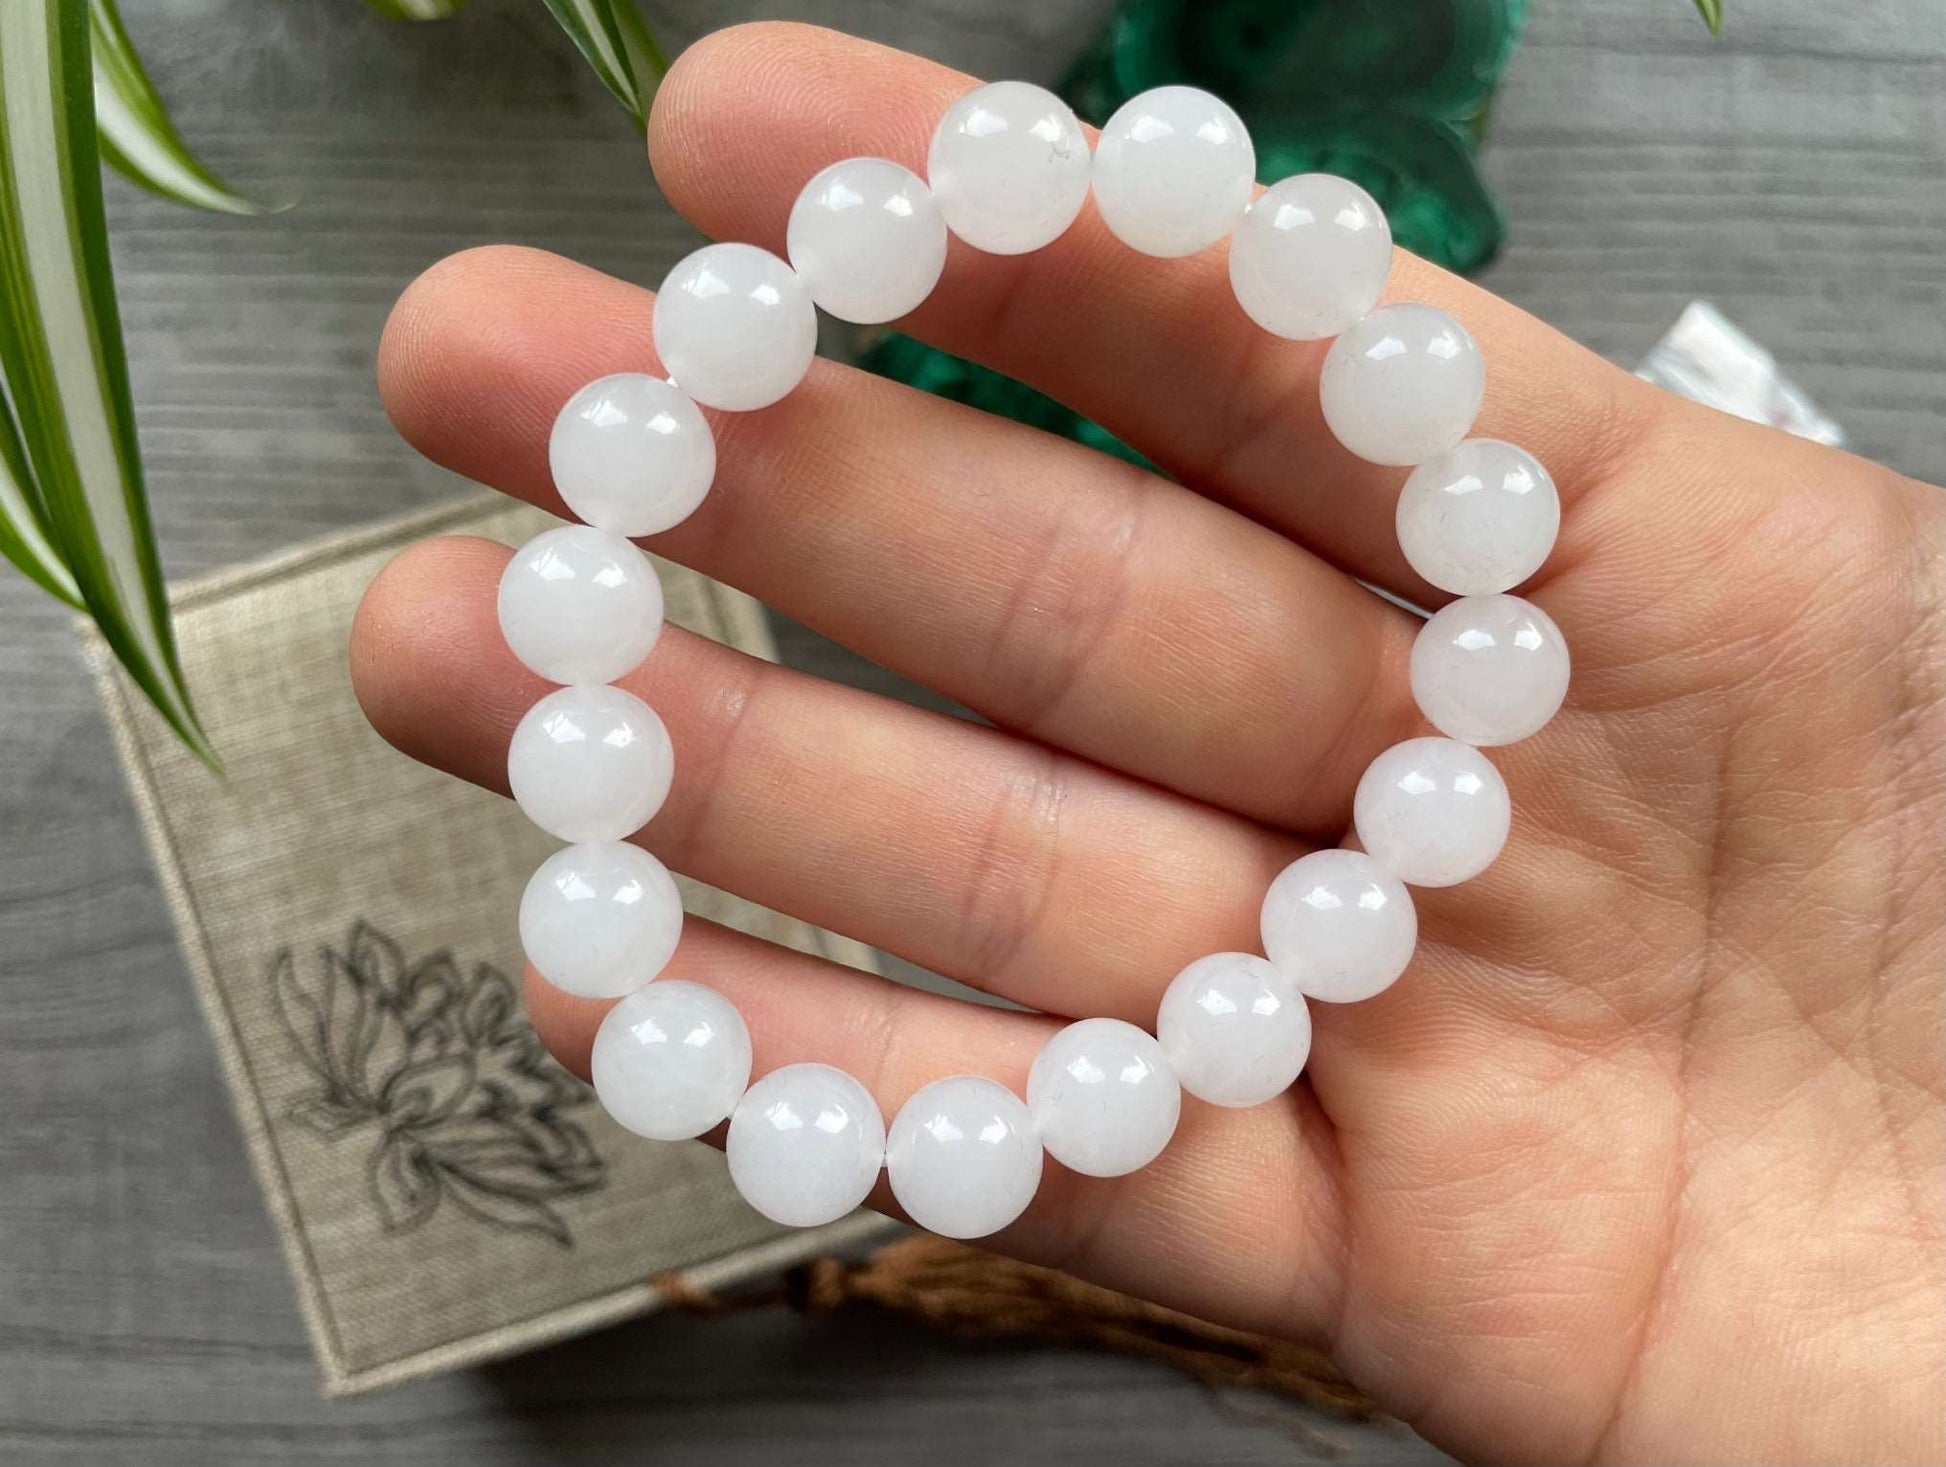 Pictured is a genuine, high-quality white jade bead bracelet.